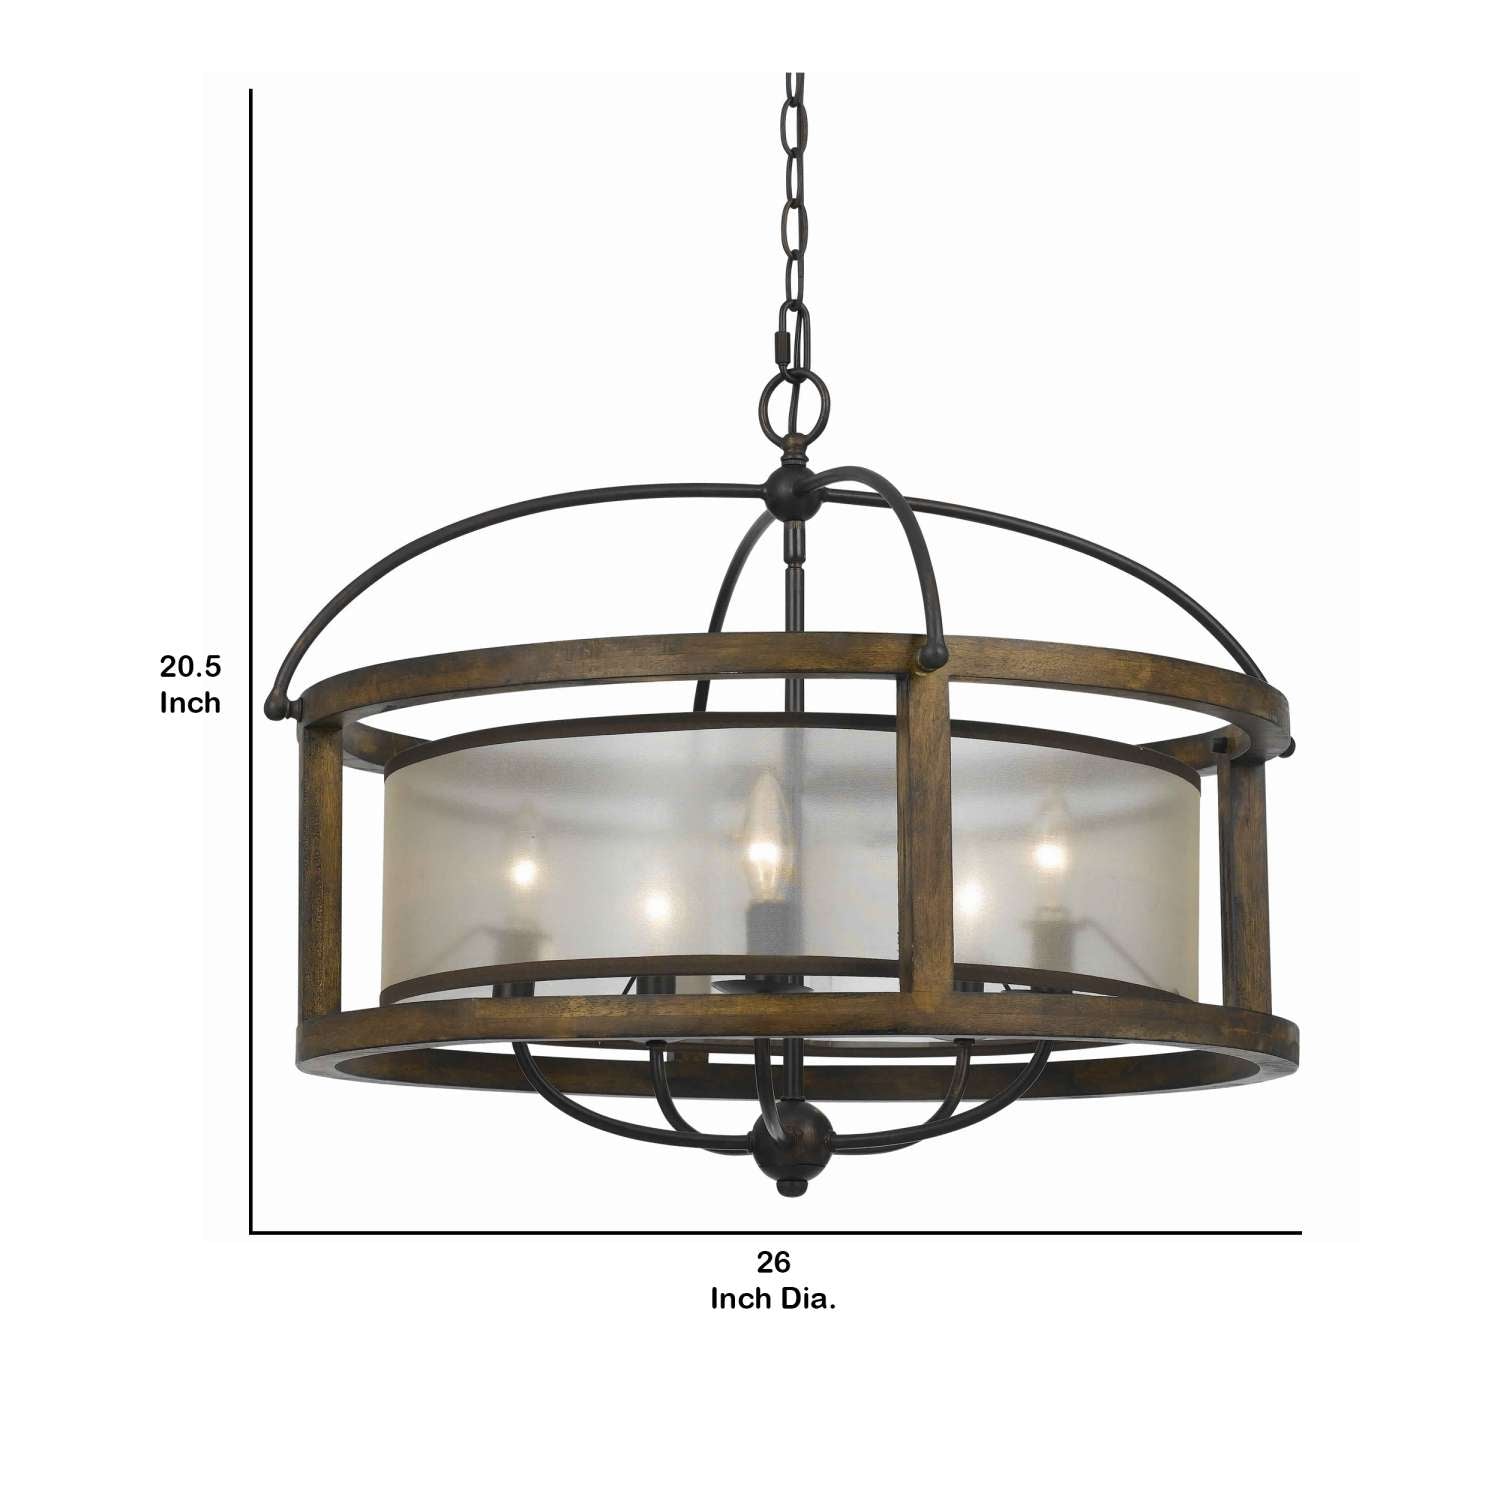 5 Bulb Round Chandelier With Wooden Frame And Organza Striped Shade, Brown By Benzara